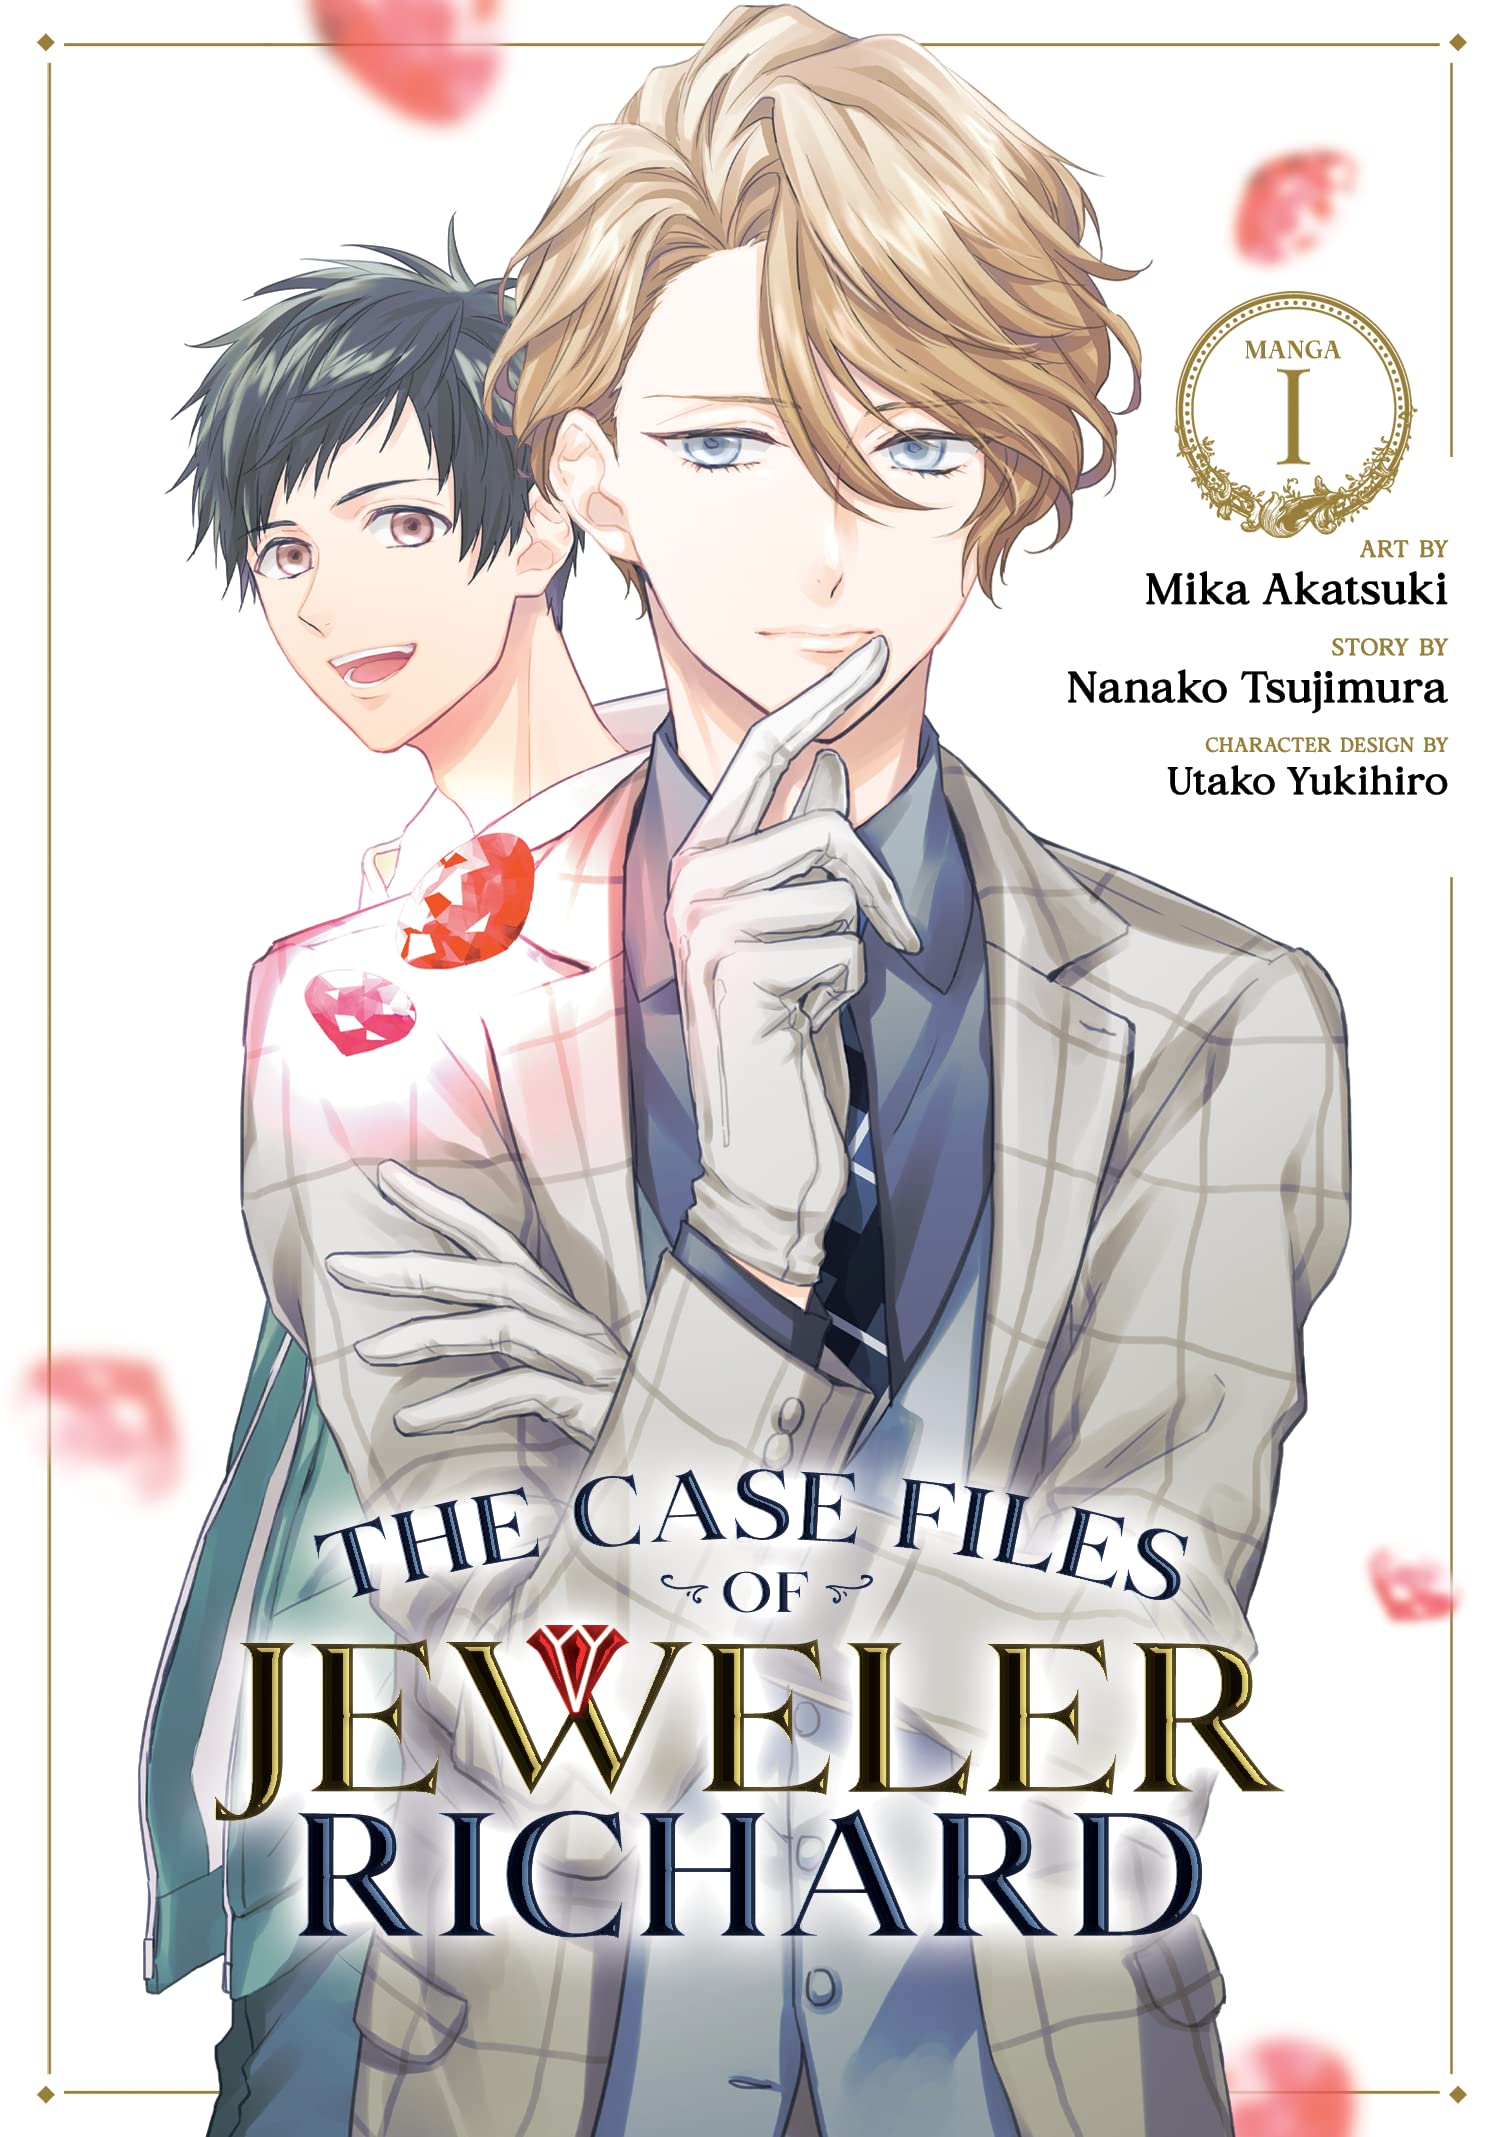 Cover of “The Case Files of Jeweler Richard, Vol. 1” by Mika Akatsuki